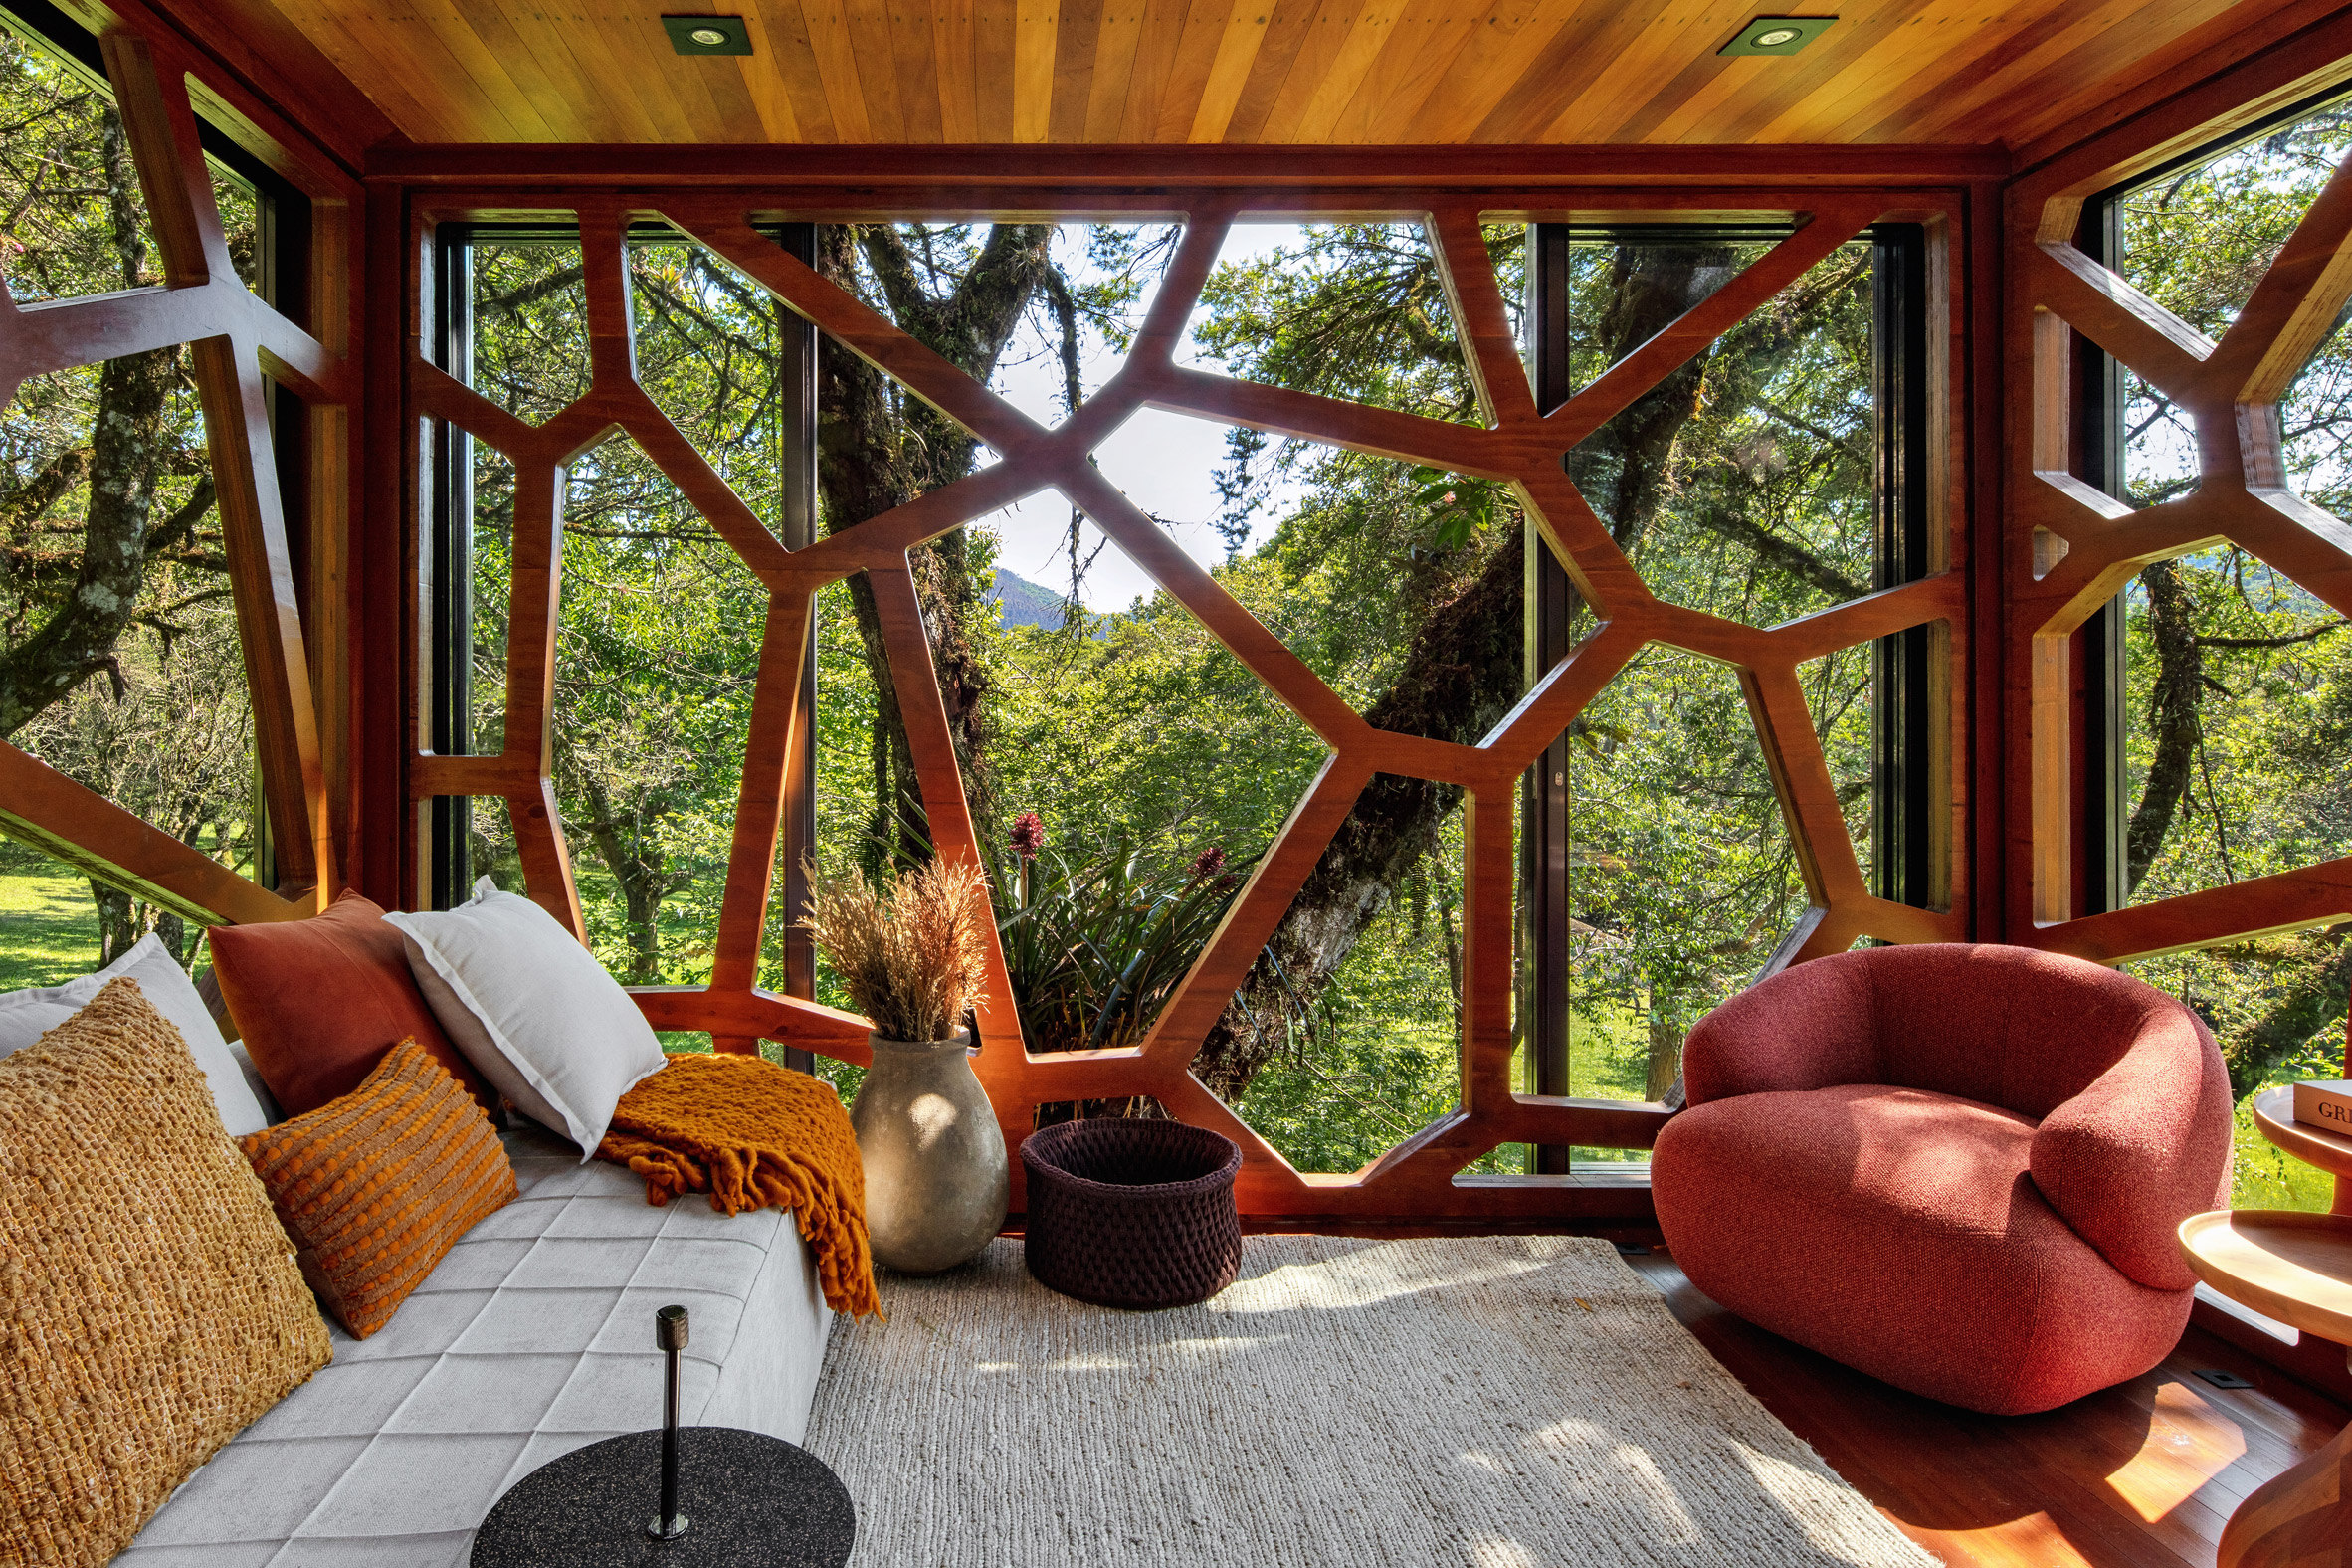 Living space within treehouse in Brazil